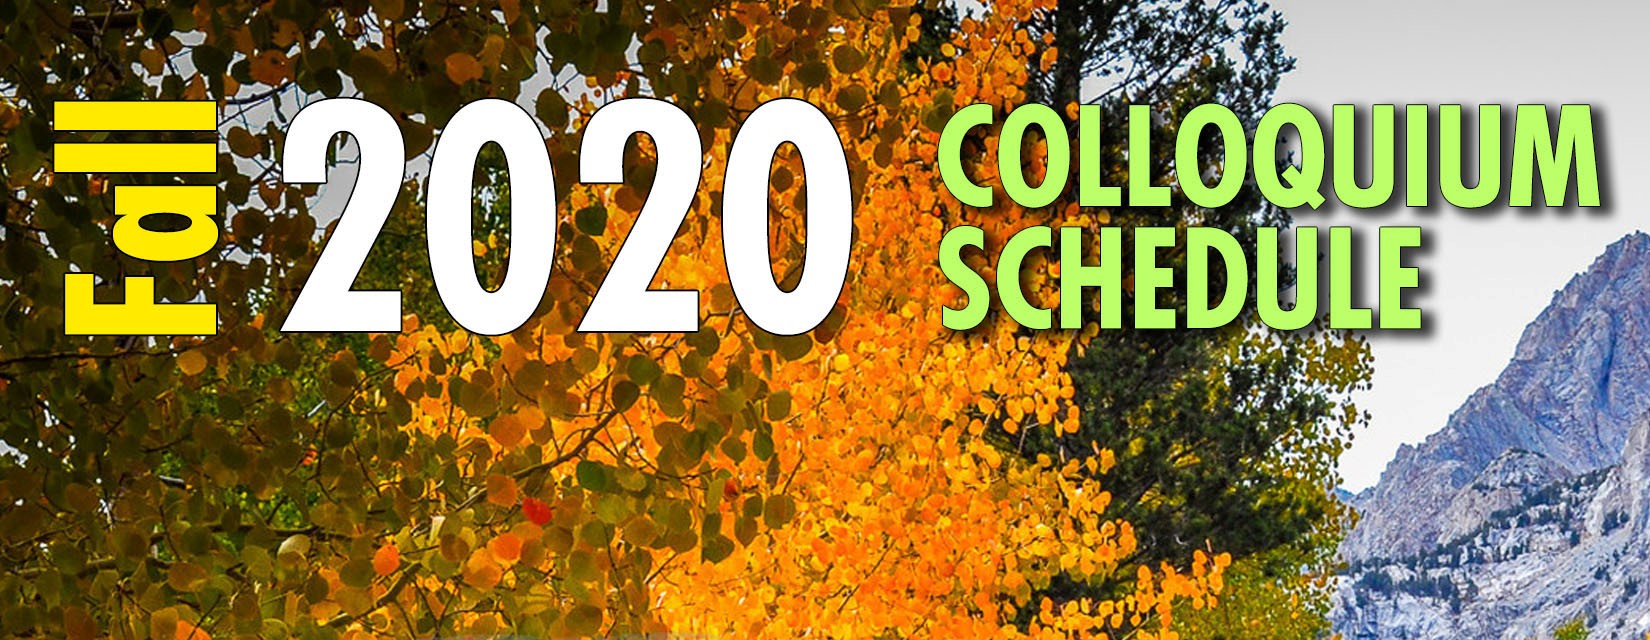 decorative banner annoucing colloquiums for 2020 Fall